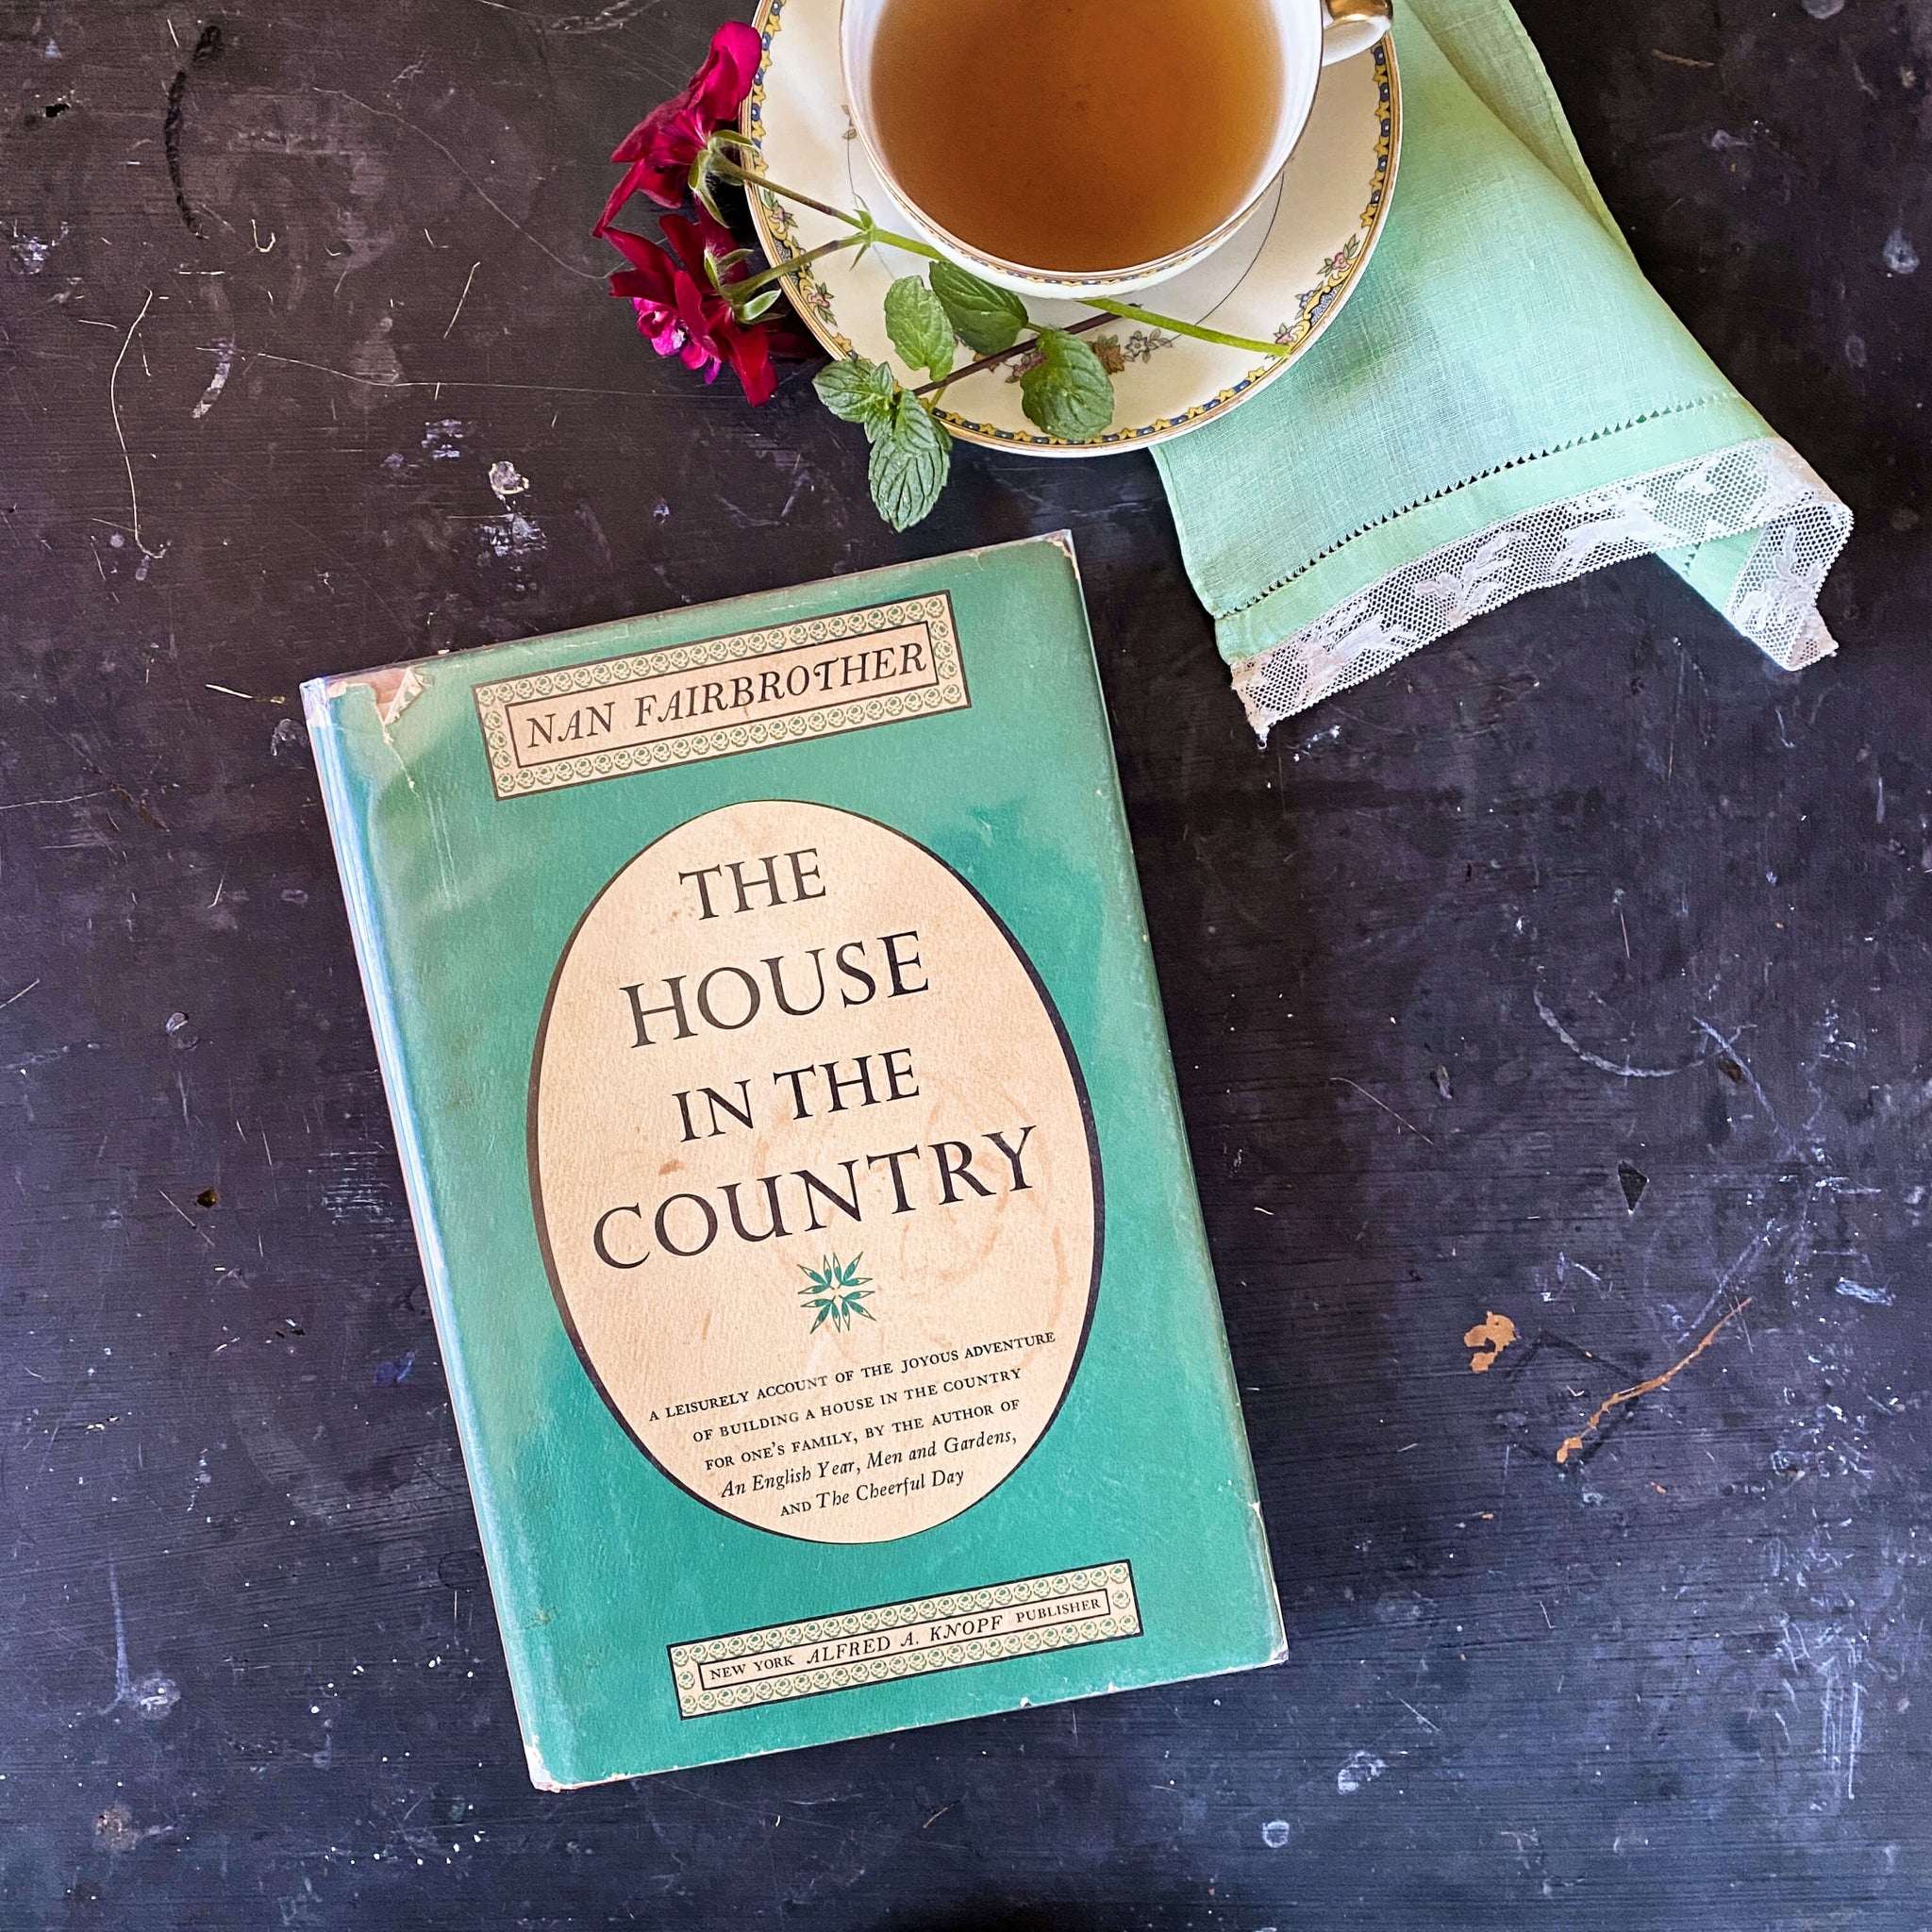 The House in the Country - Nan Fairbrother - 1965 First American Edition